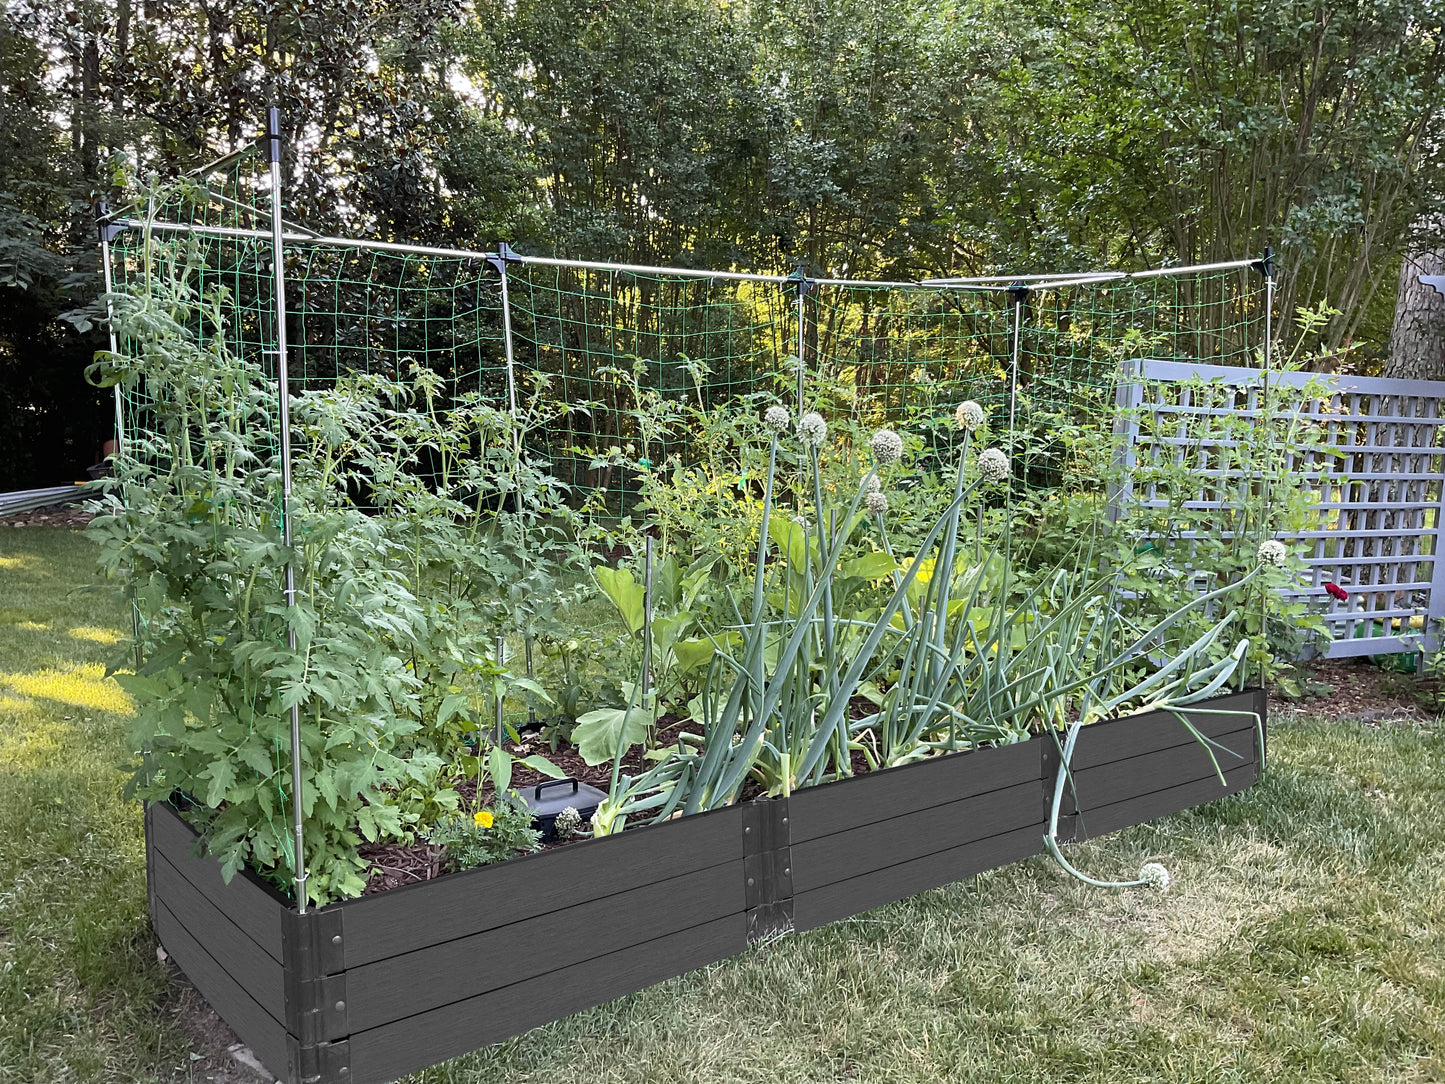 4' x 12' Raised Garden Bed with Trellis Raised Garden Beds Frame It All Weathered Wood 2" 3 = 16.5"